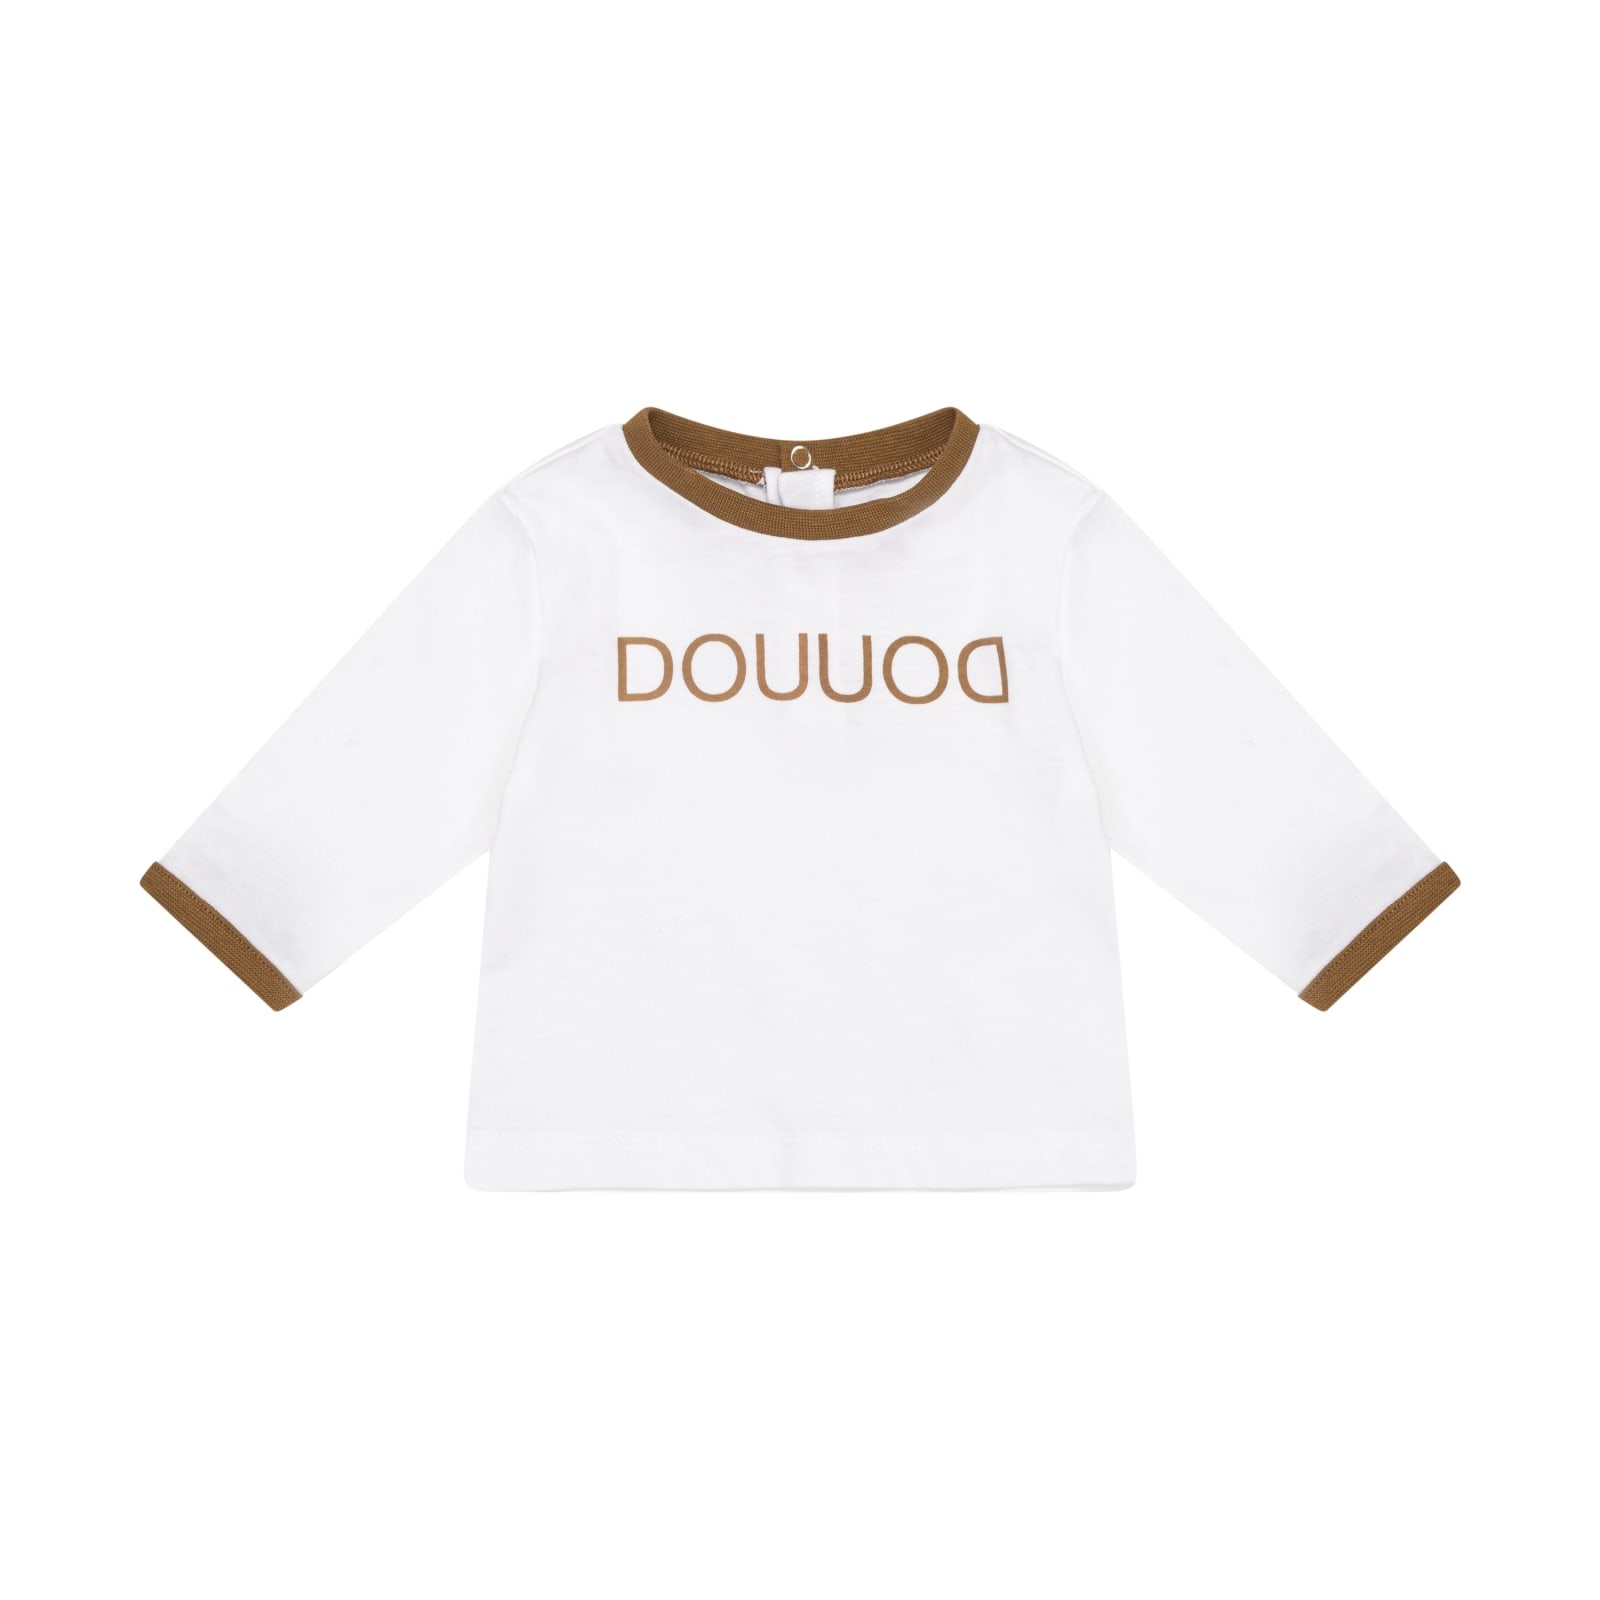 Douuod Babies' Printed T-shirt In White